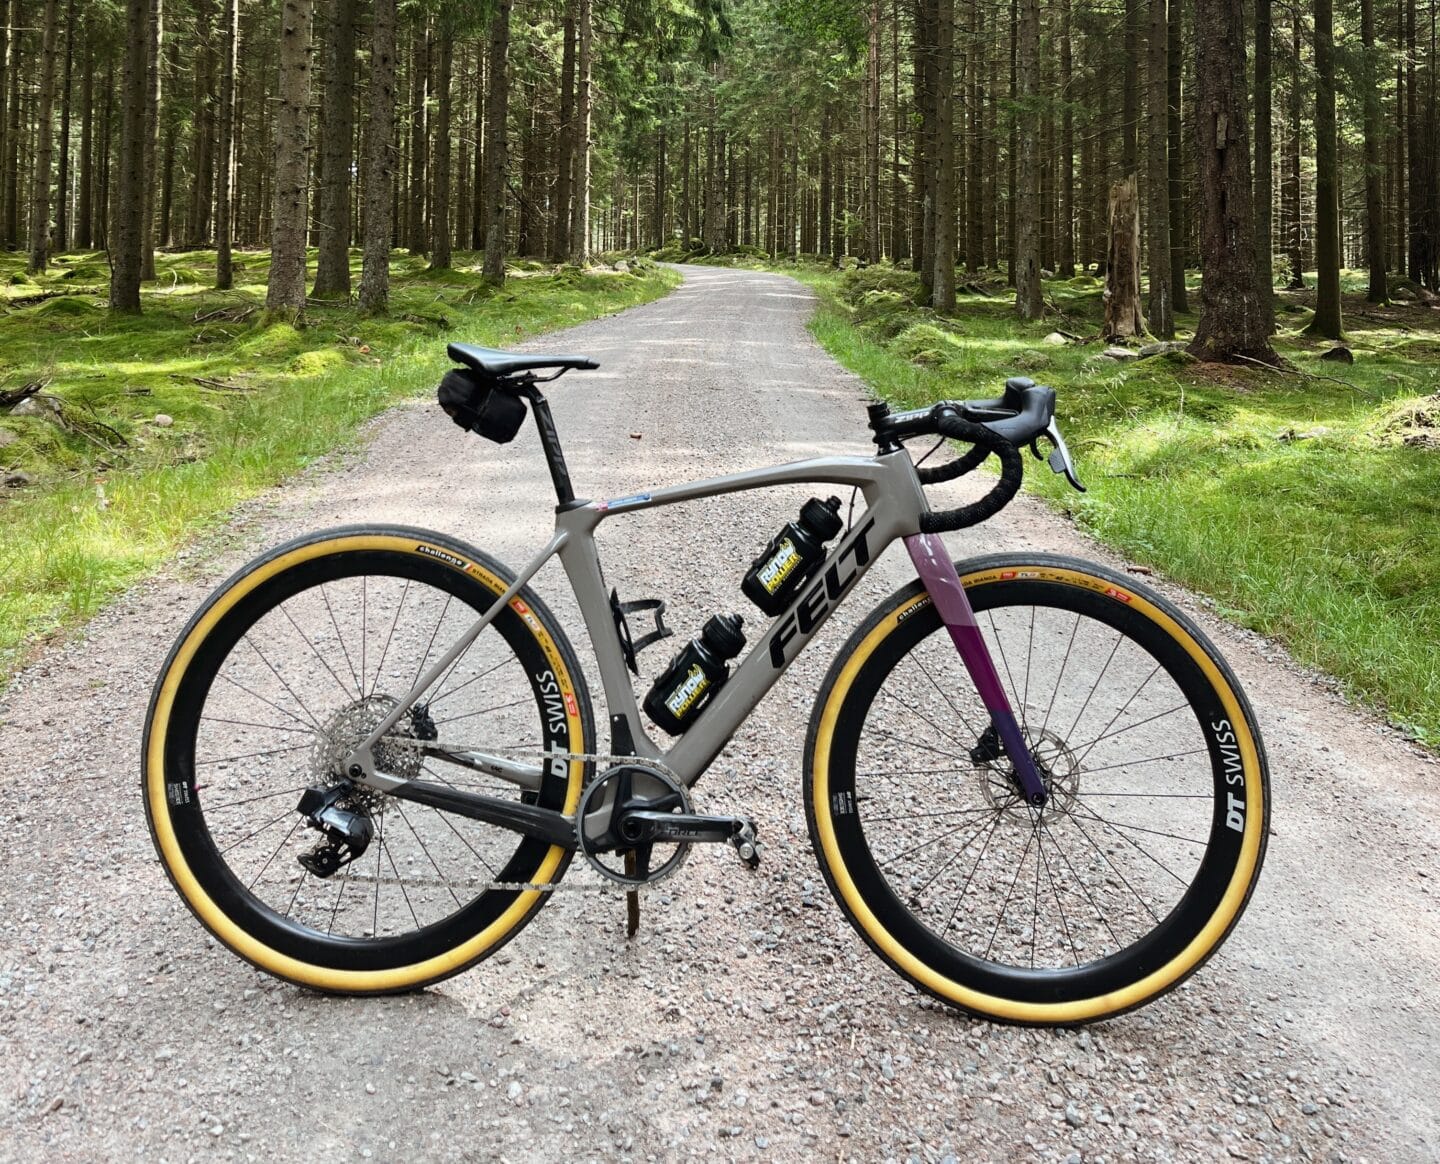 gravel bike in the forest